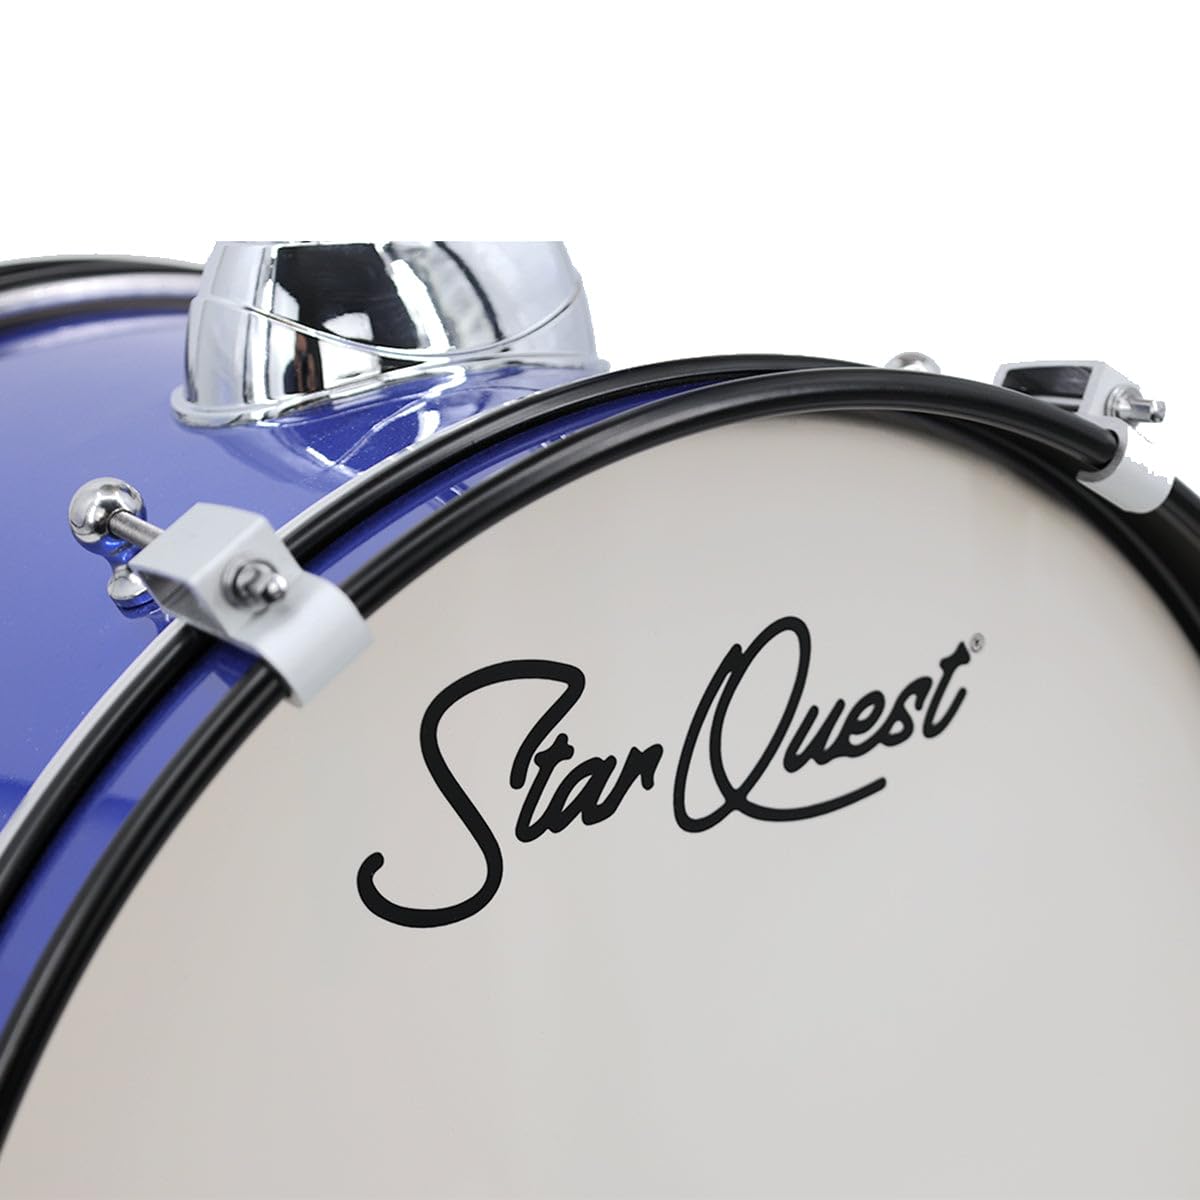 StarQuest SQ-DS-JR3-MBL Junior 3-Piece Drum Set – Premium Metallic Blue Finish – Perfect for Young Drummers and Beginners, High Quality